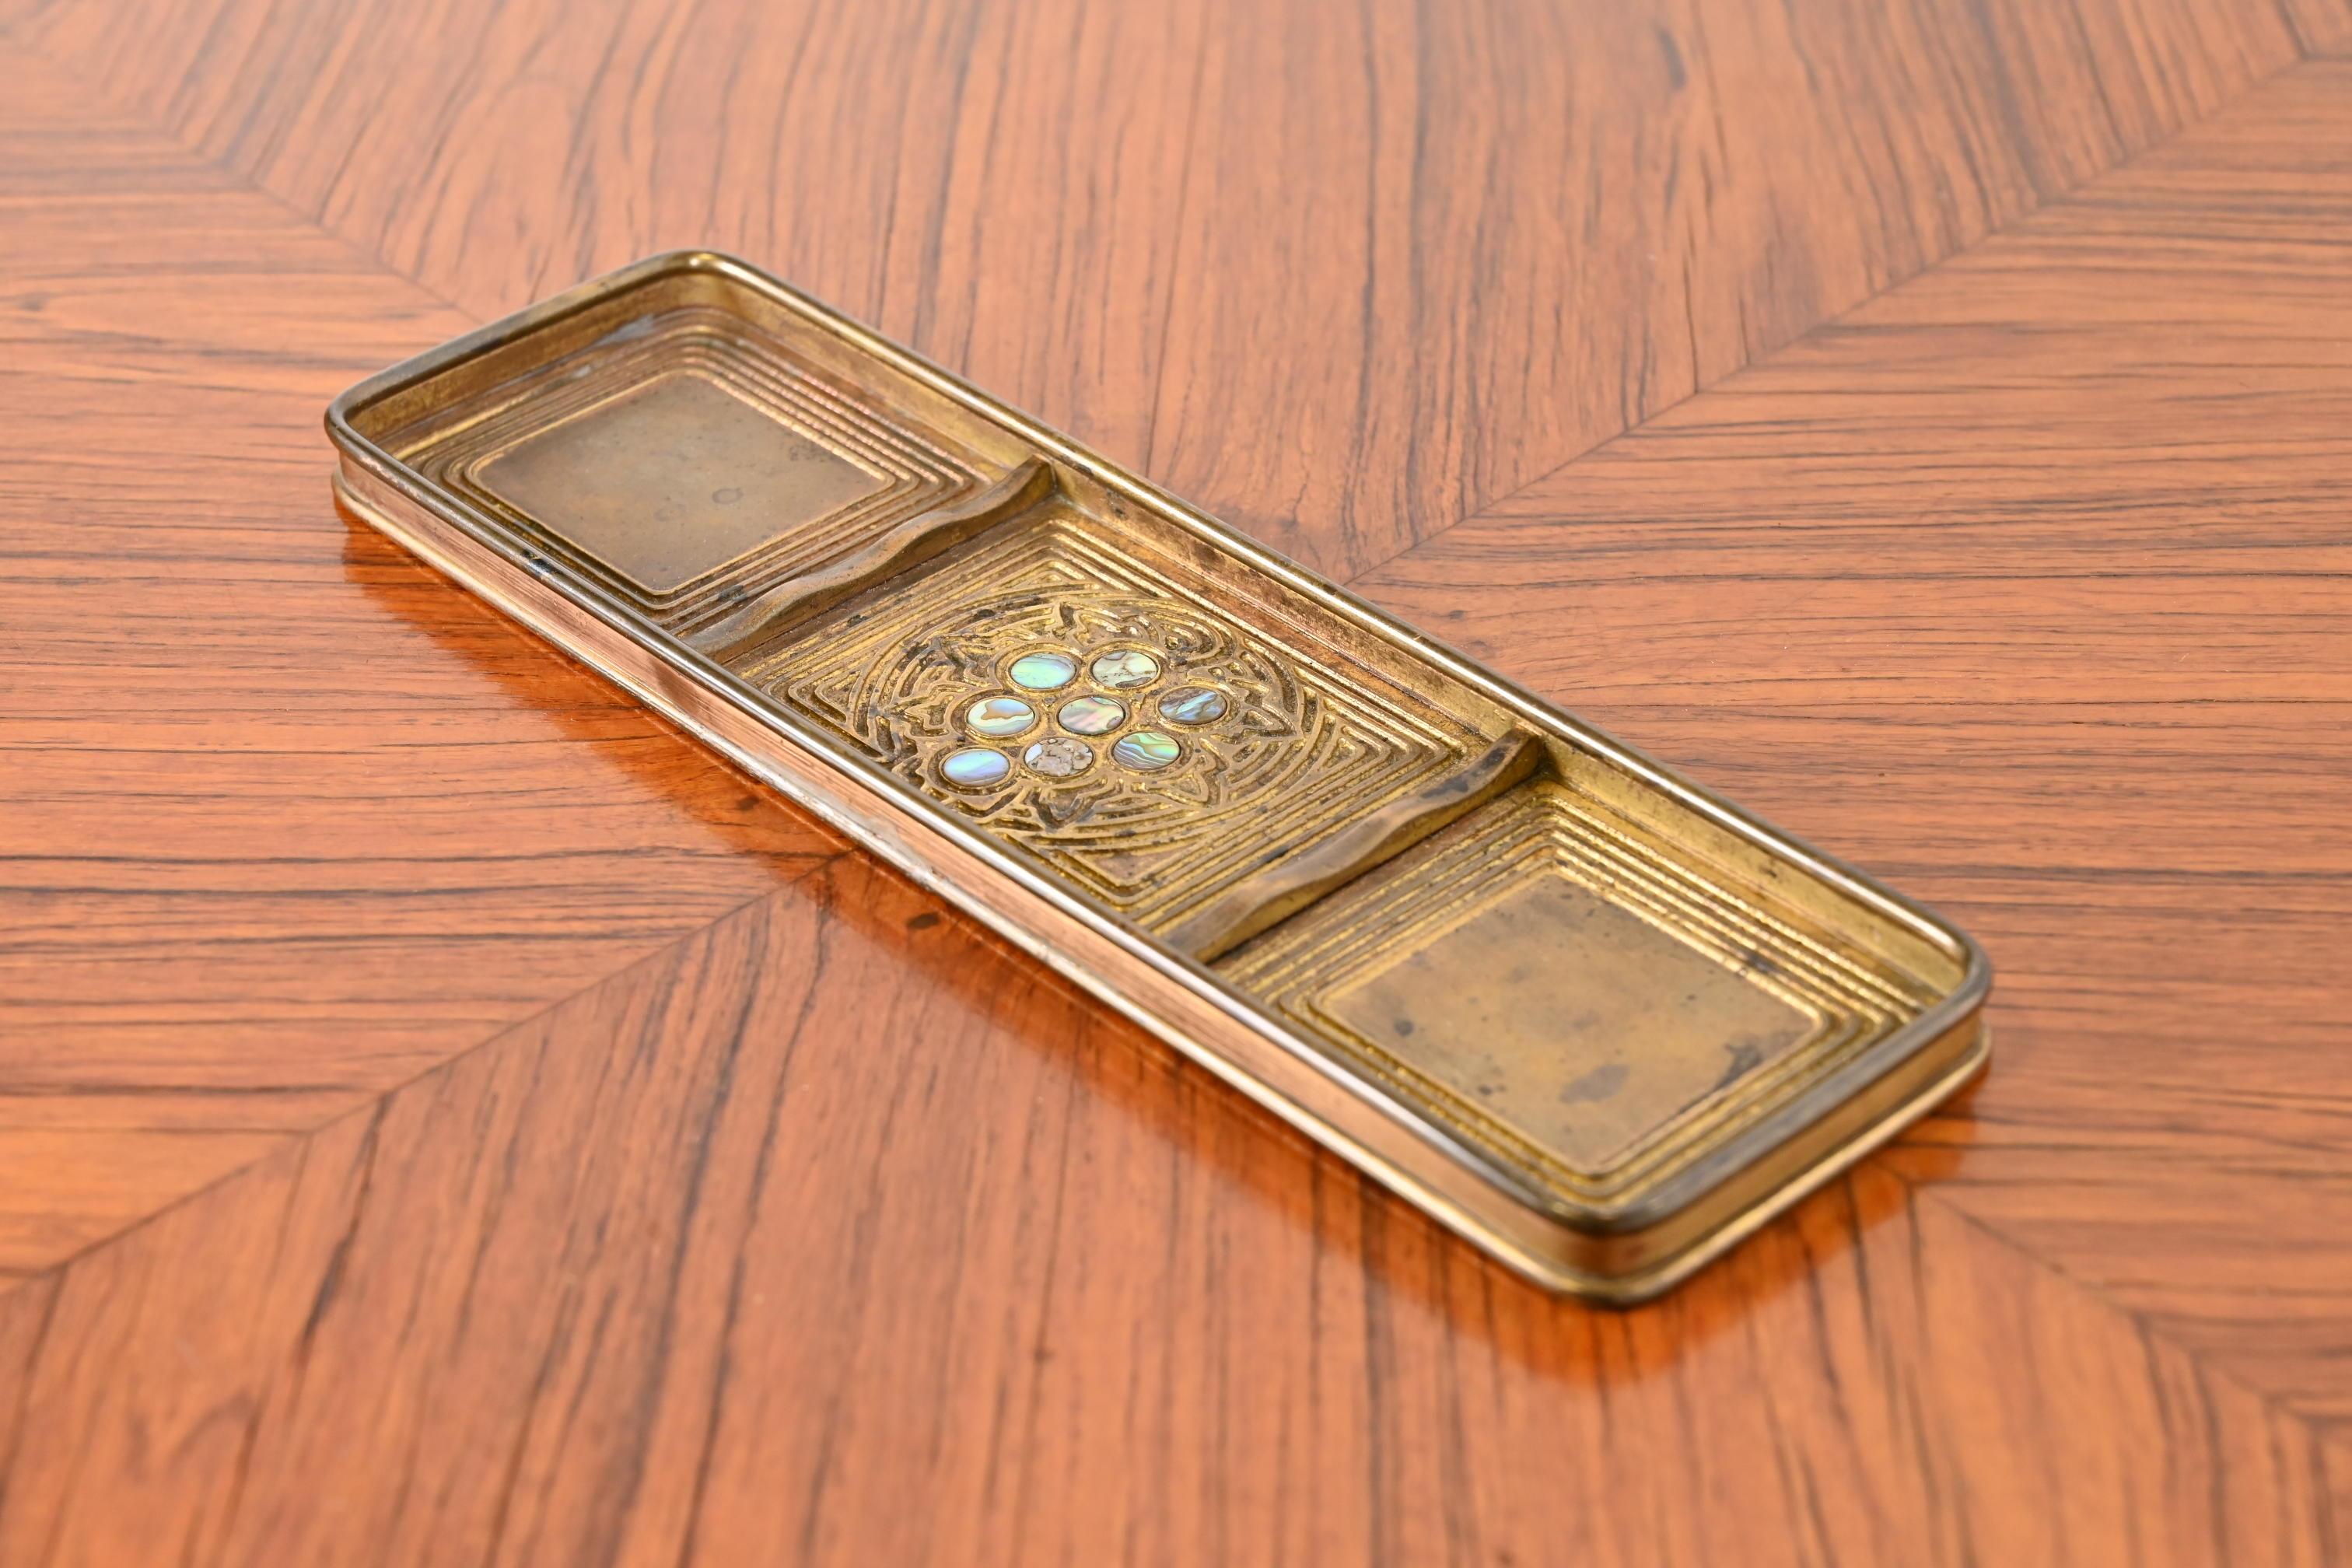 Tiffany Studios New York Bronze Doré and Abalone Pen Tray, circa 1910 In Good Condition For Sale In South Bend, IN